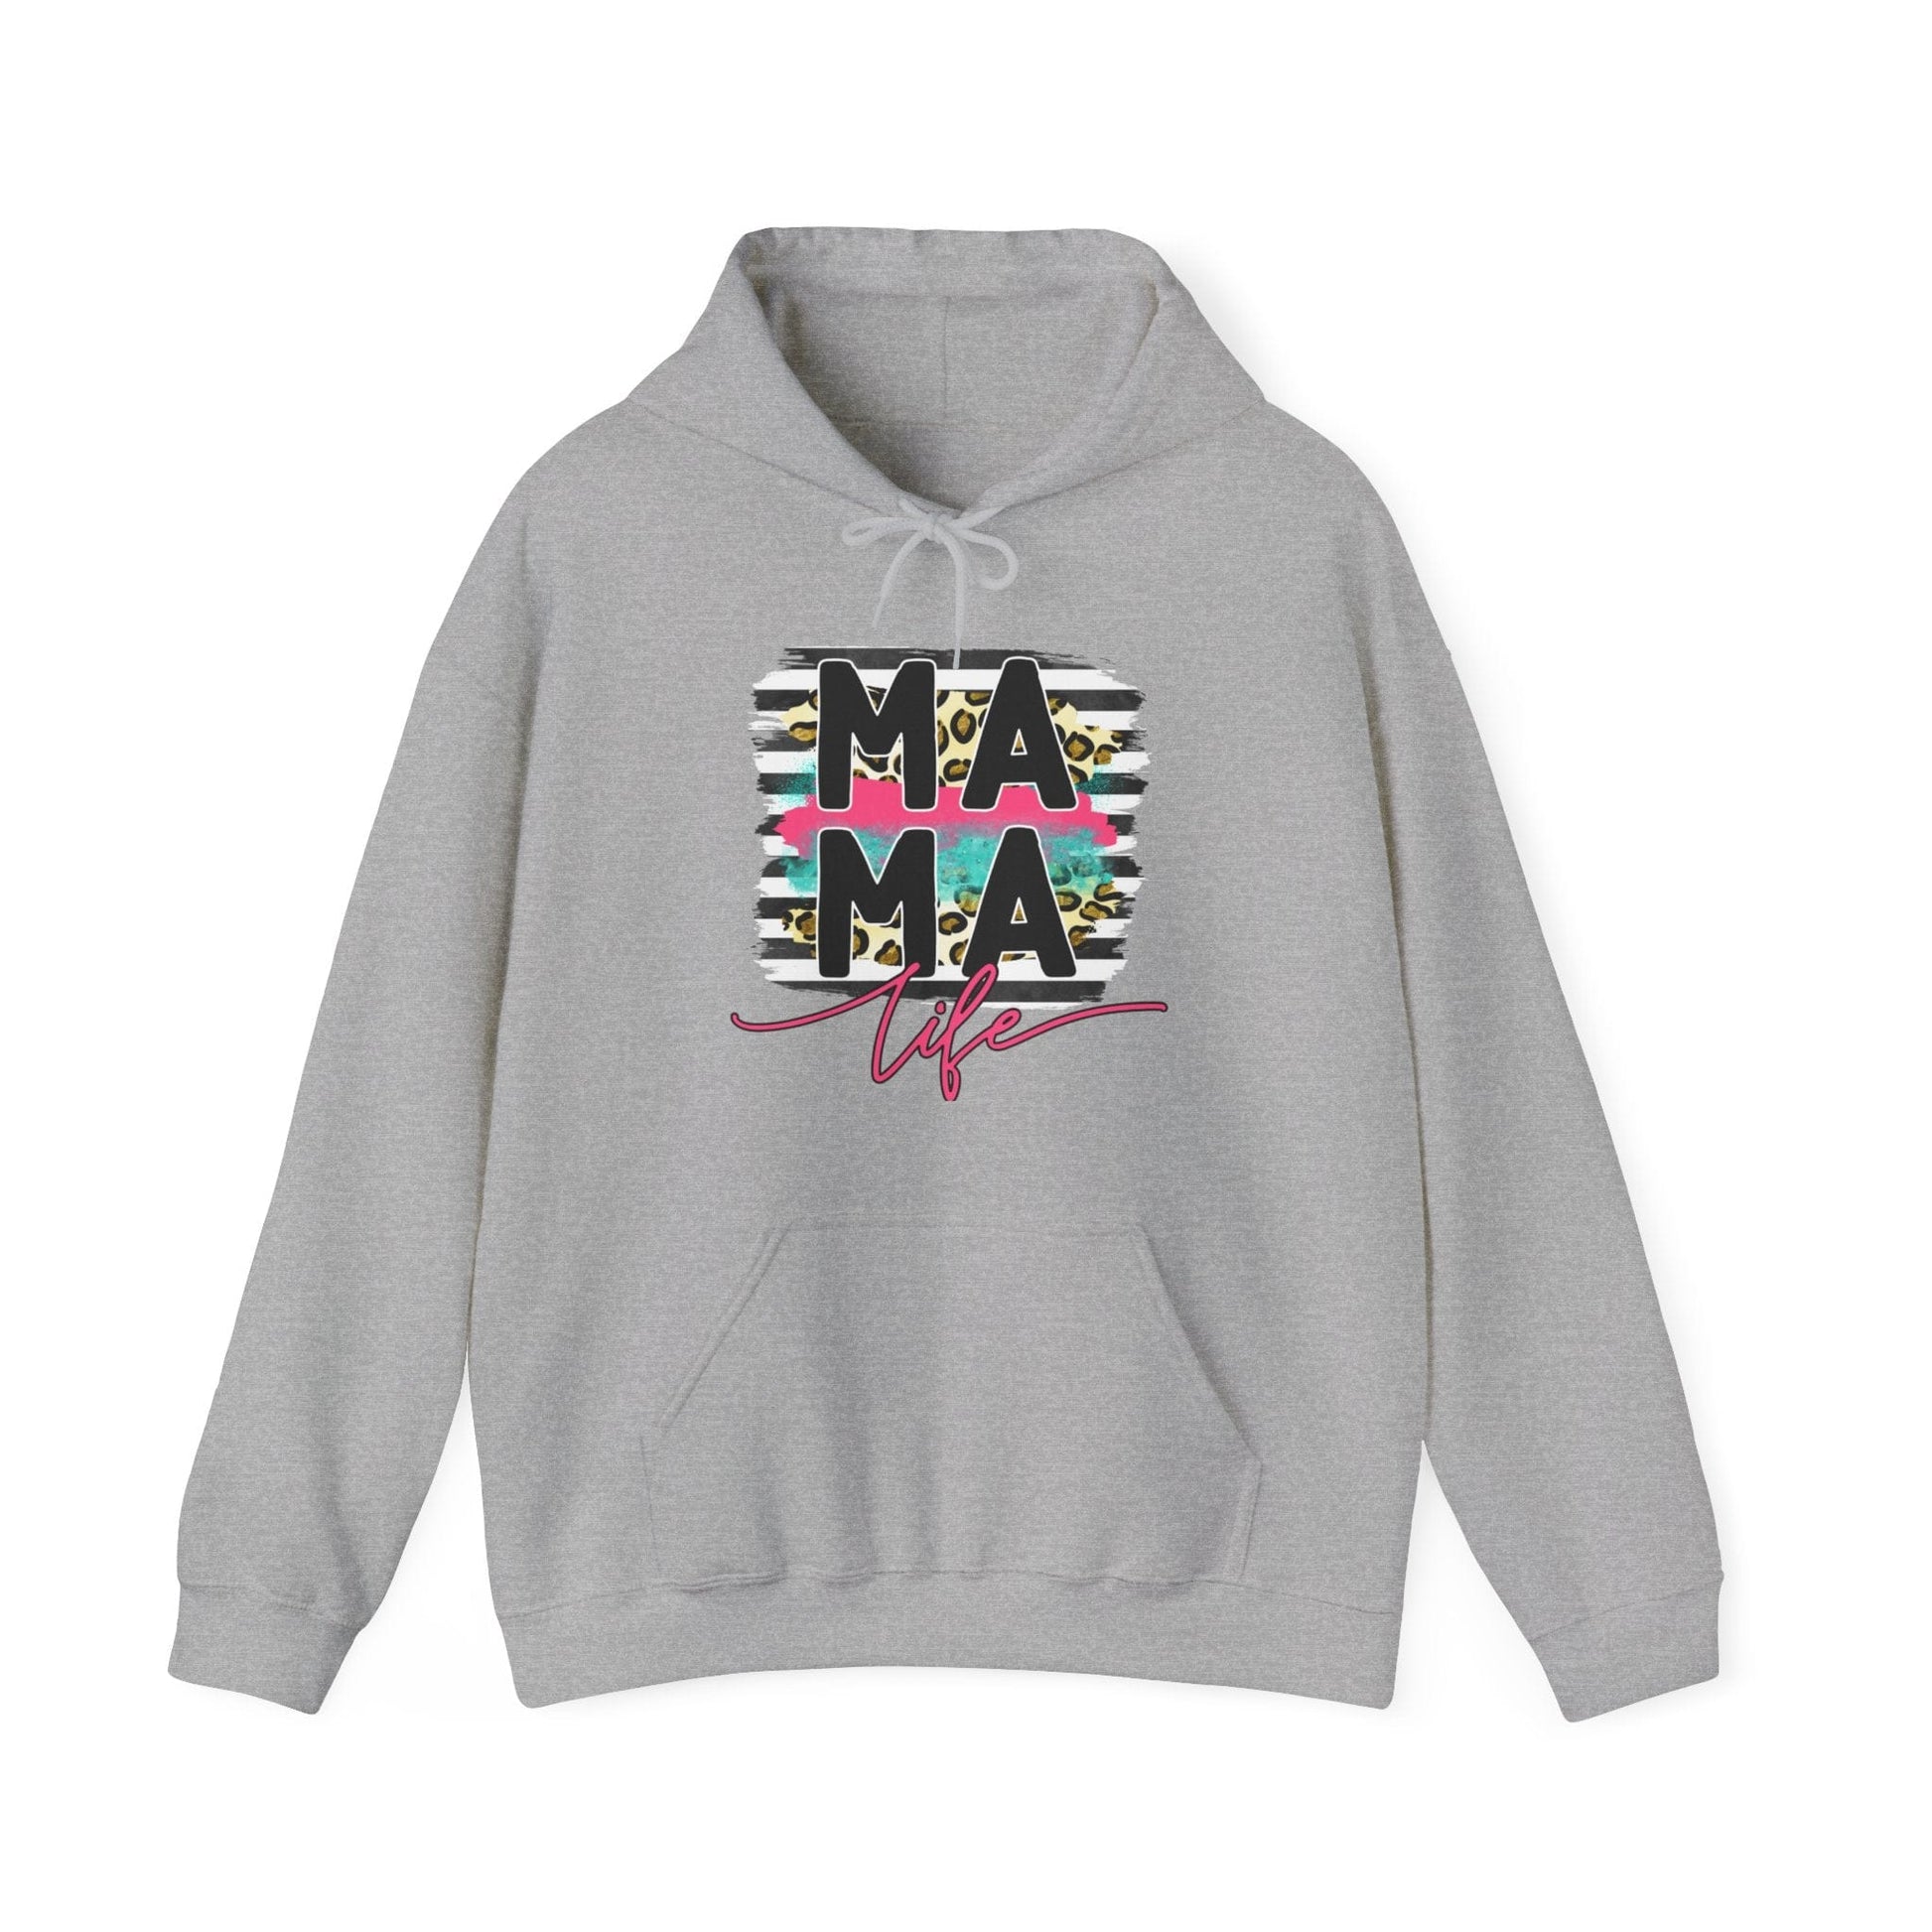 Celebrate motherhood with the ‘Mama Life’ hooded sweatshirt, featuring a beautiful blend of floral design and modern typography, a warm Mother's Day gift for cherished moms – available now at D1gital Emporium US.